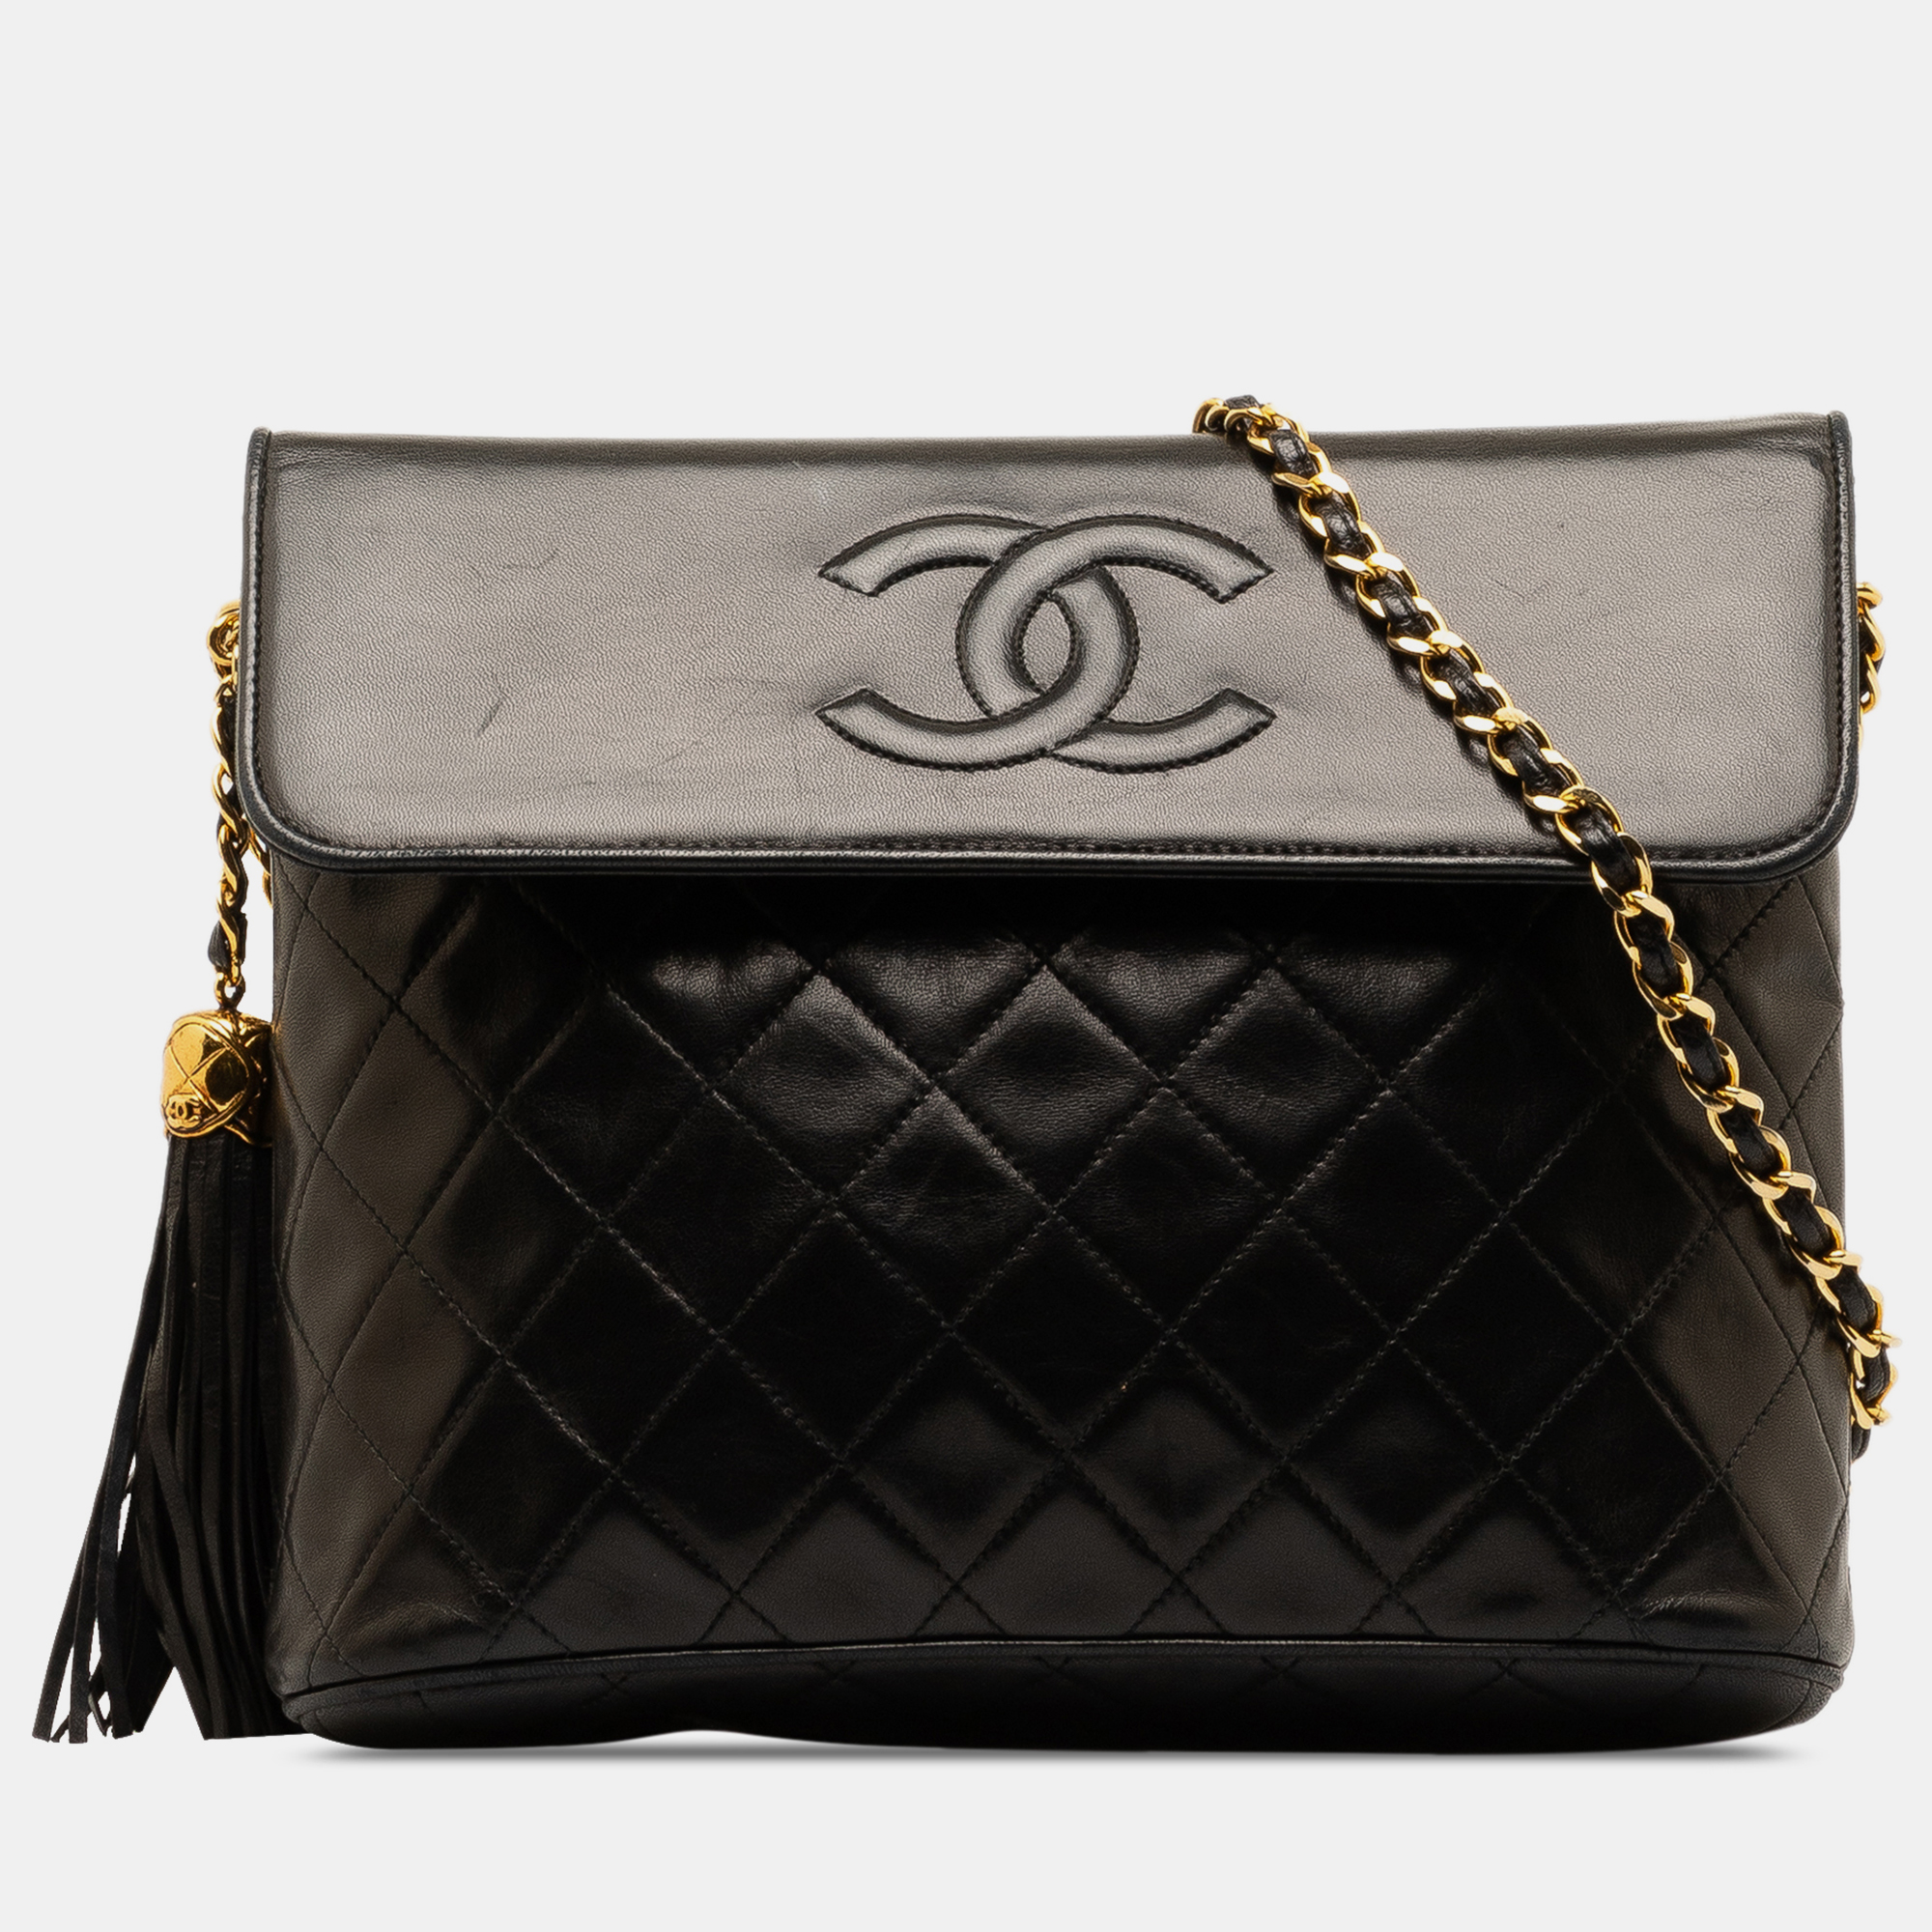 Chanel cc quilted lambskin crossbody